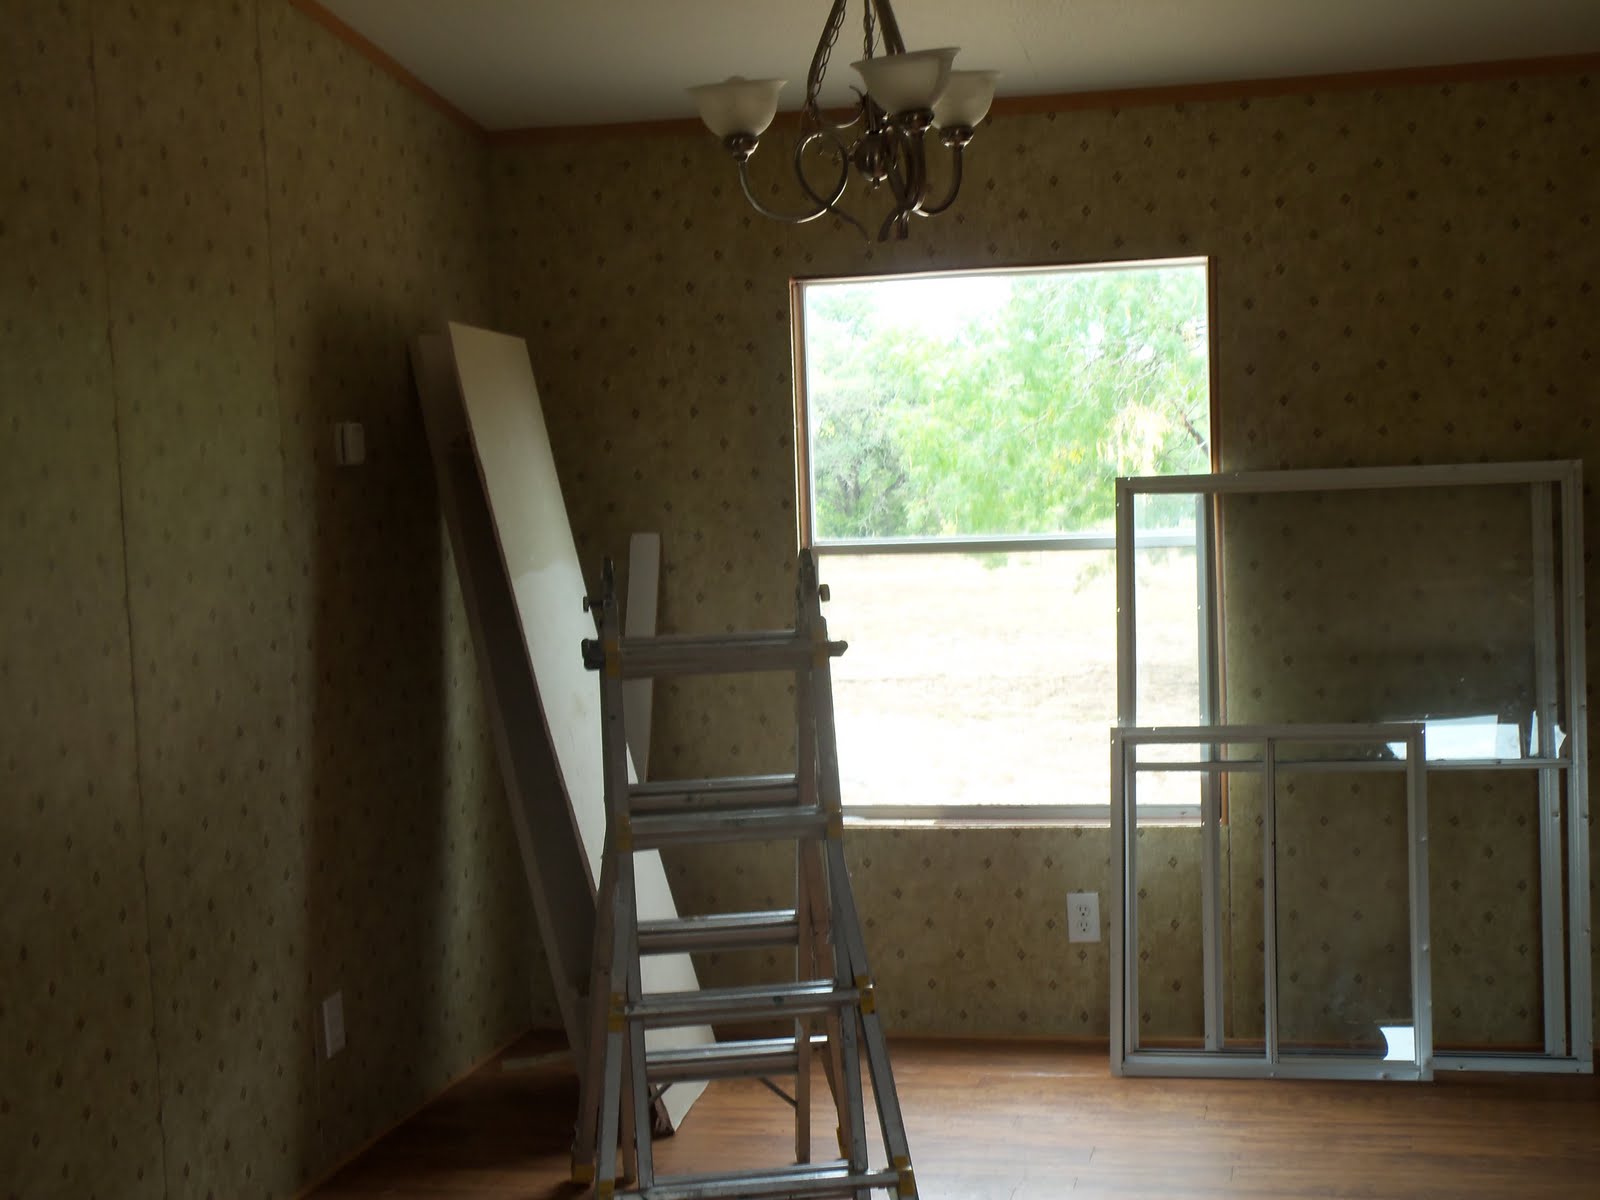  Painting  Mobile  Home  Wallpaper Home  Painting 